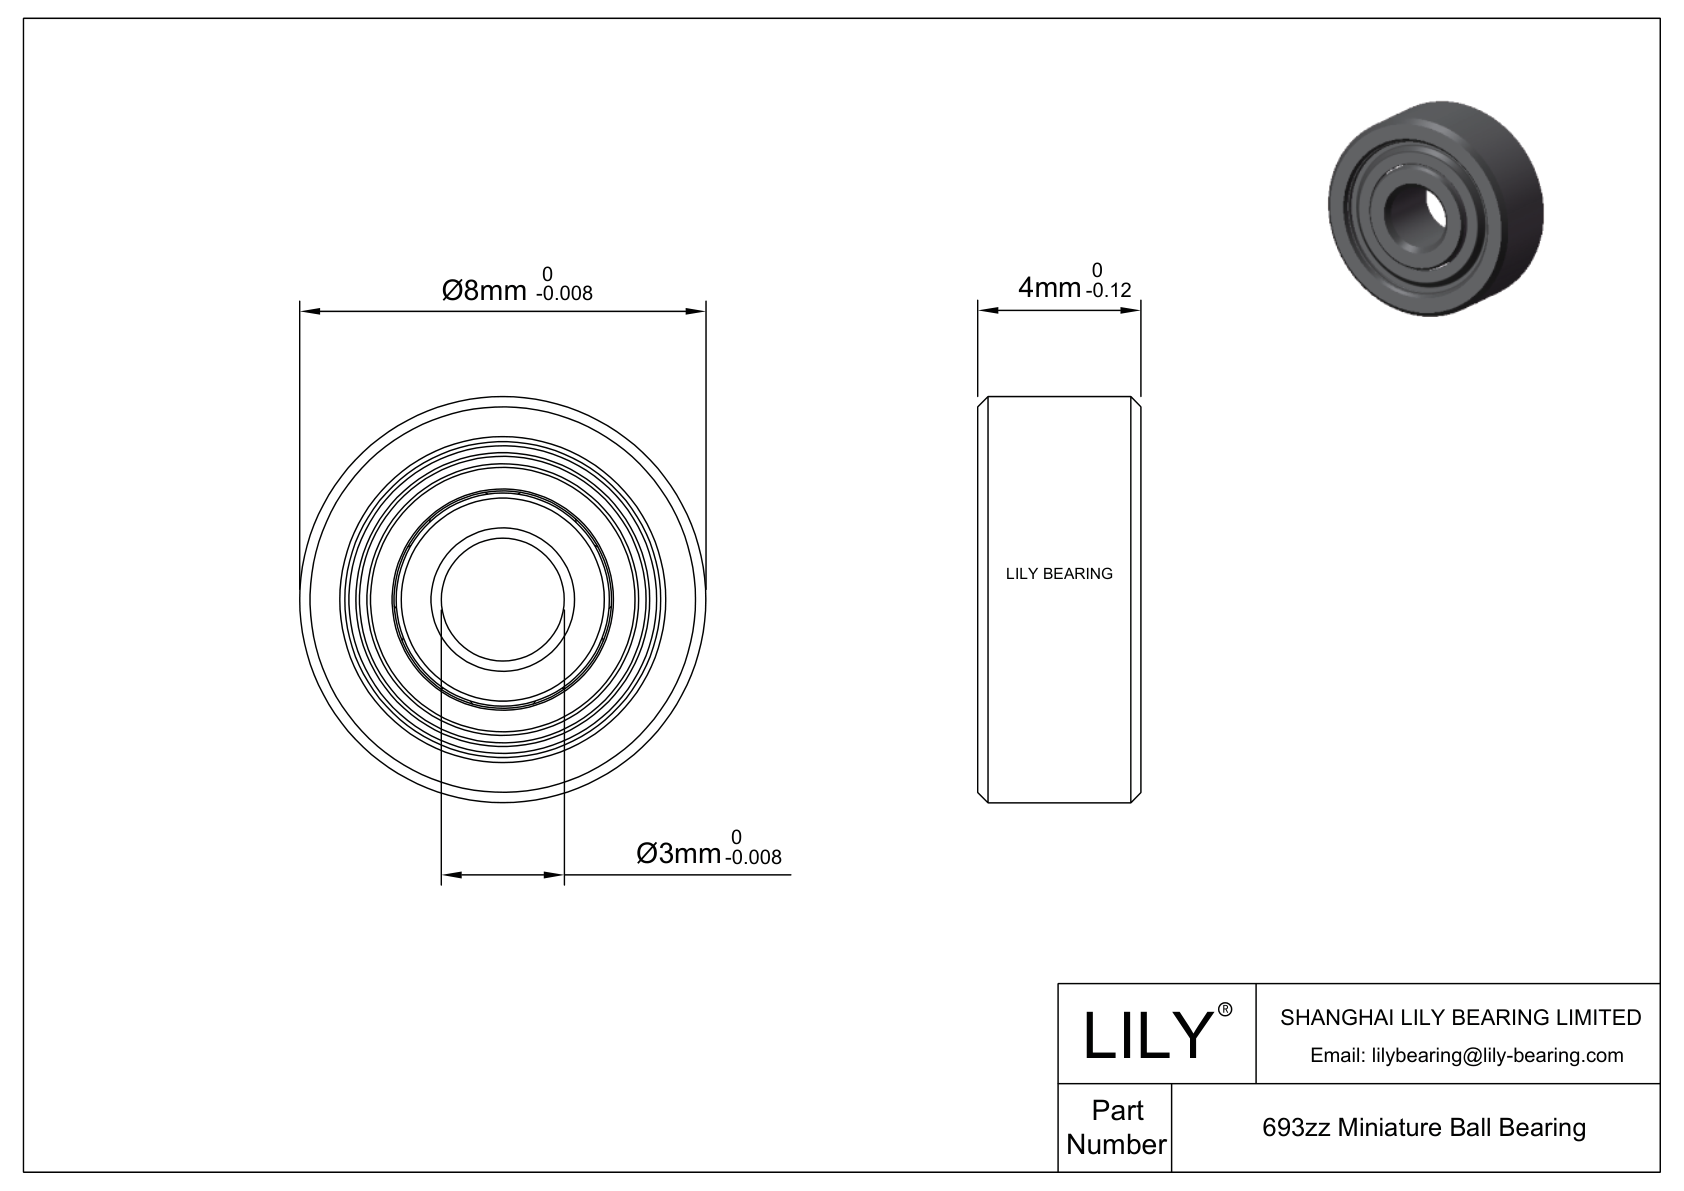 LILY-BST69315-26 Outsourcing POM bearings cad drawing